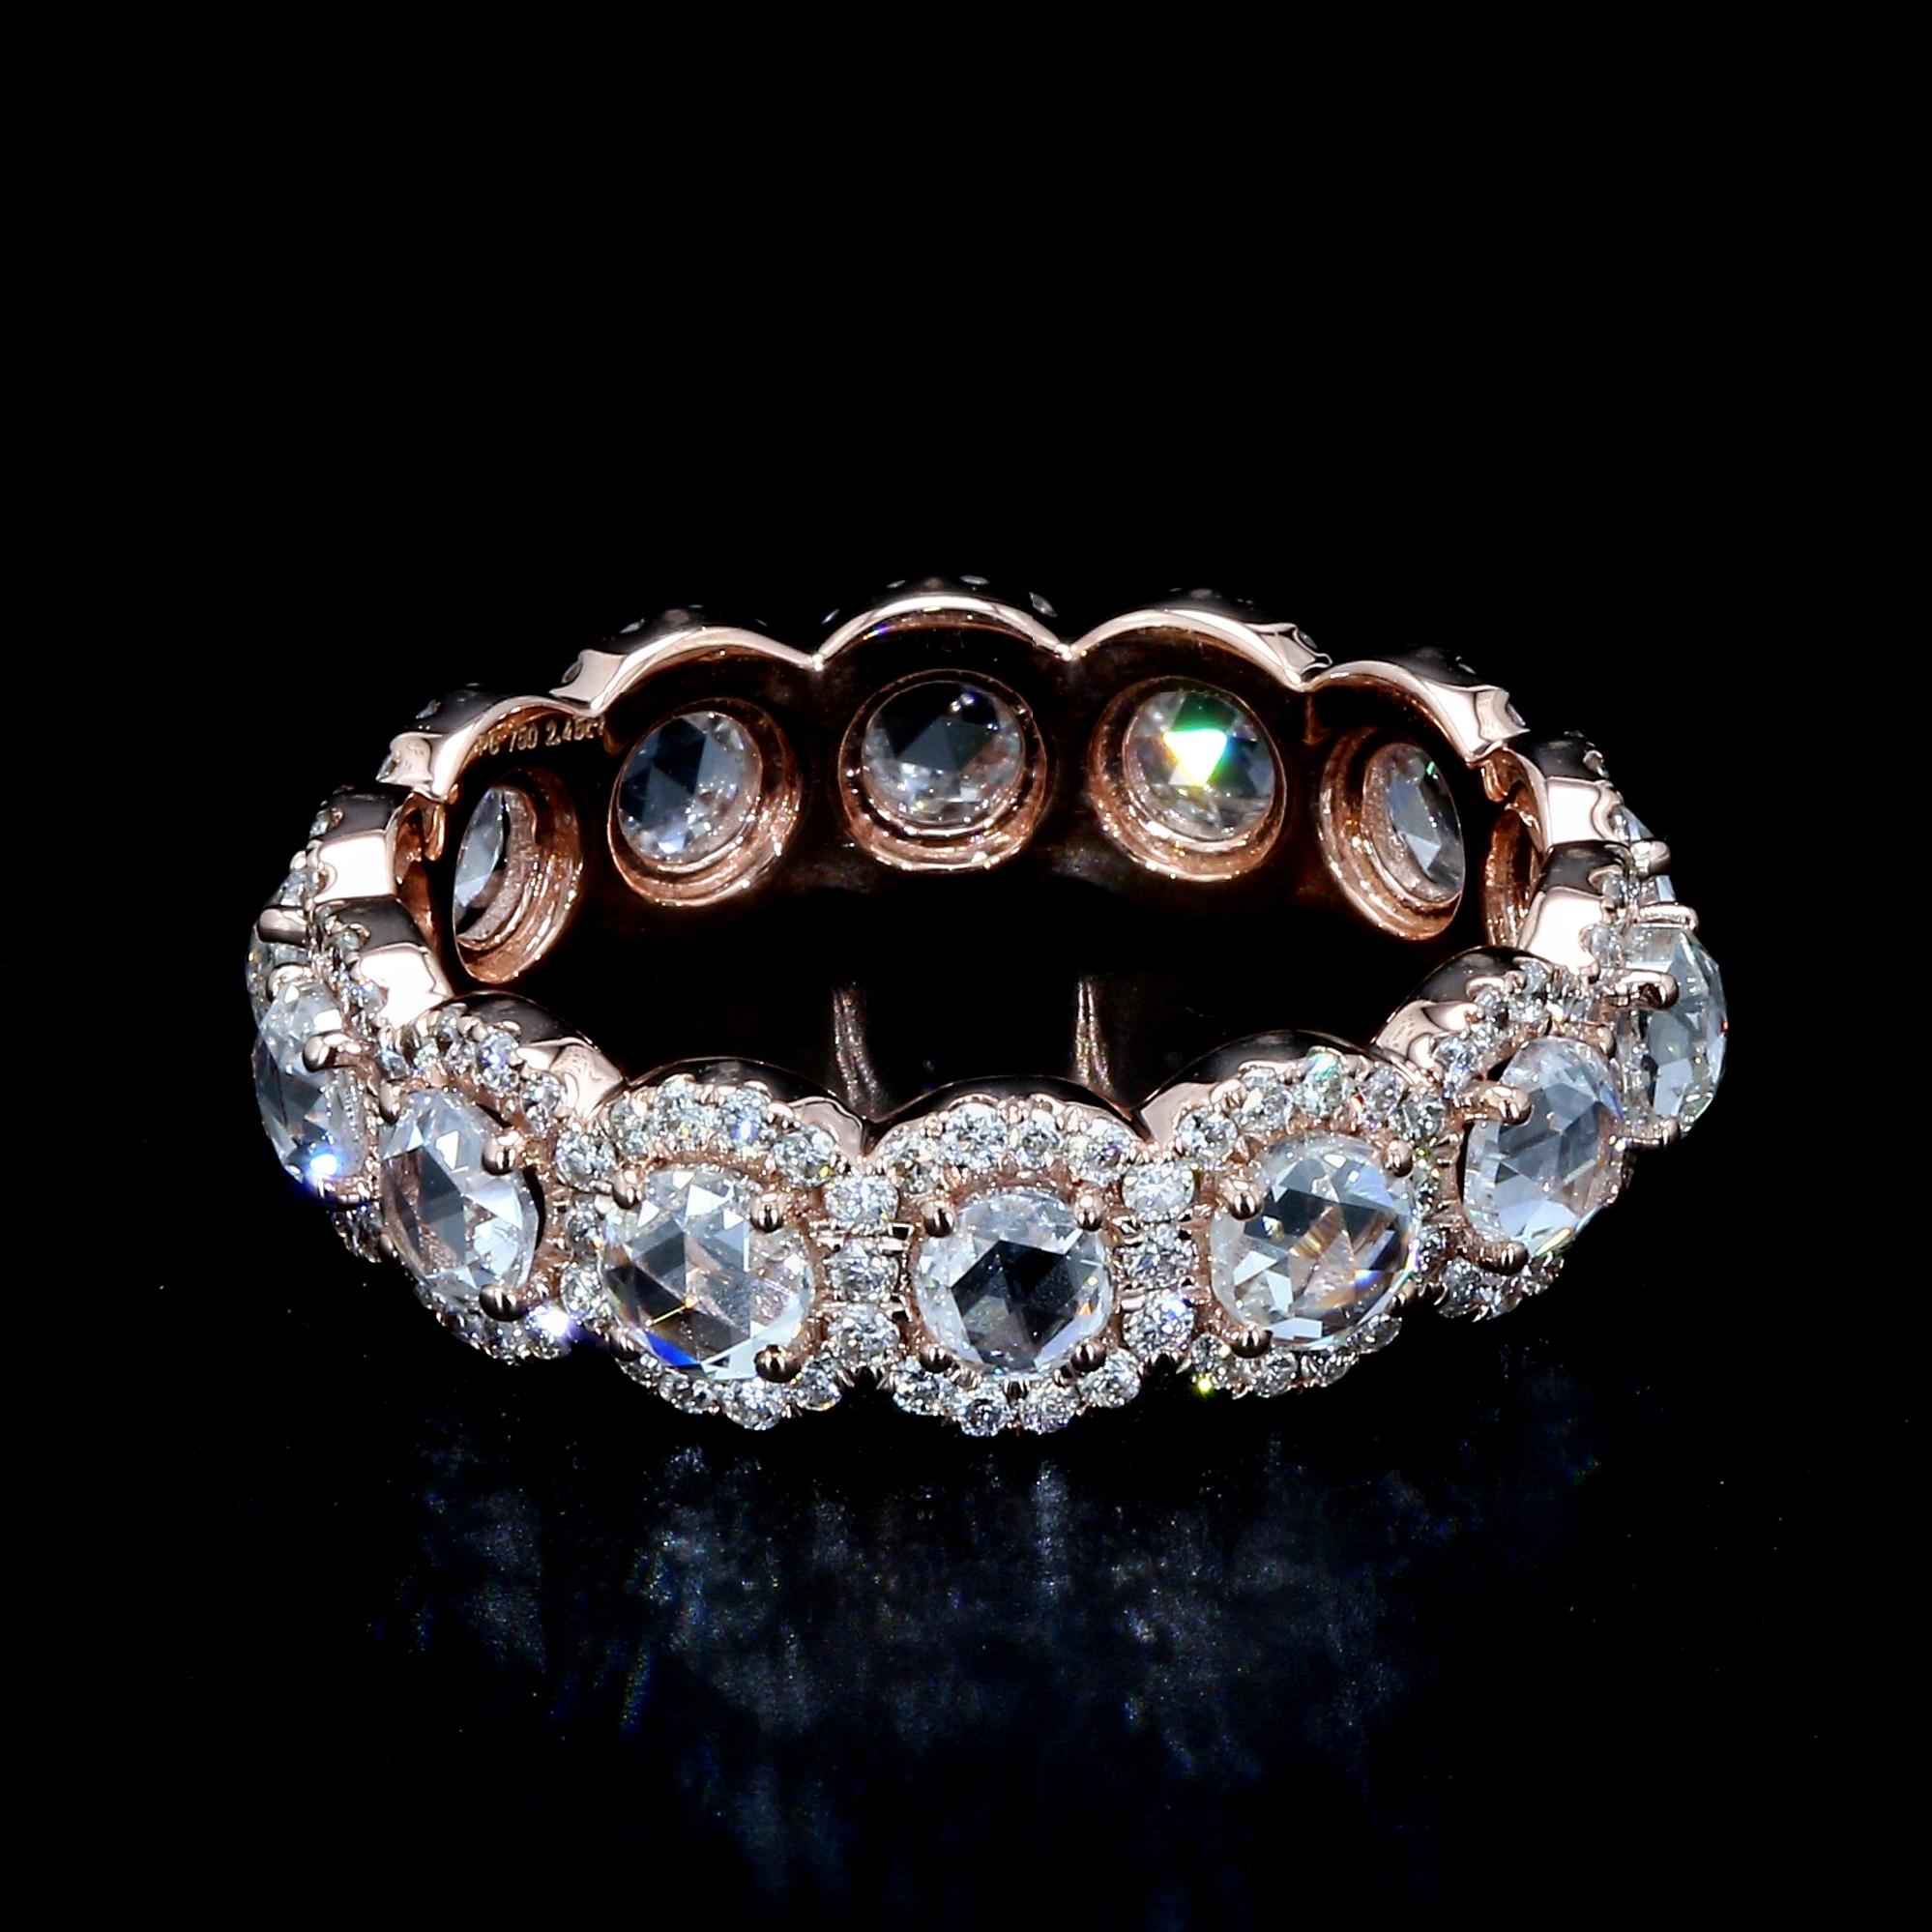 PANIM  18k Rose Gold Round Rosecut Diamond Eternity Ring

This lovely Panim eternity ring is made of 18k rose gold and showcases the graceful simplicity of dazzling round rosecut diamonds & round brilliant diamonds set in a traditional, standard